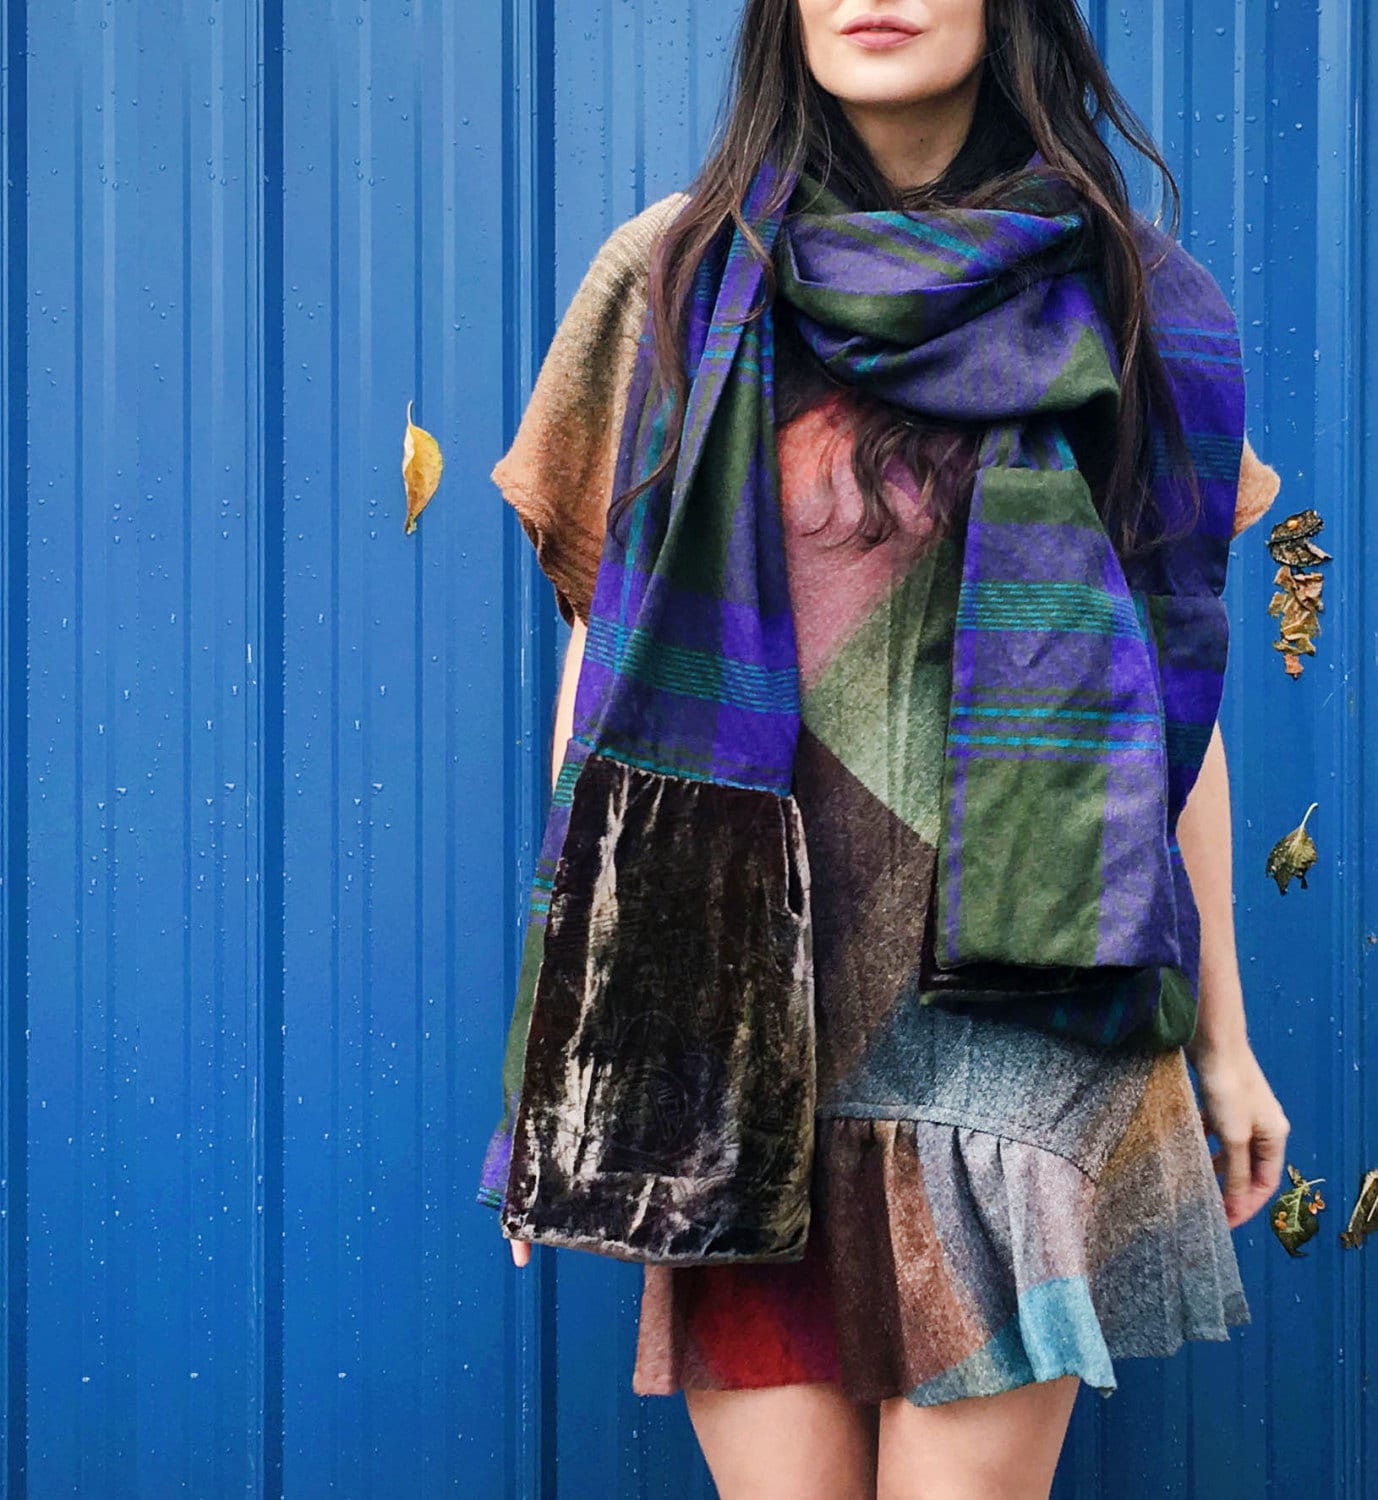 Lux Hunter Green Plaid Super Scarf - reclaimed wool and velvet